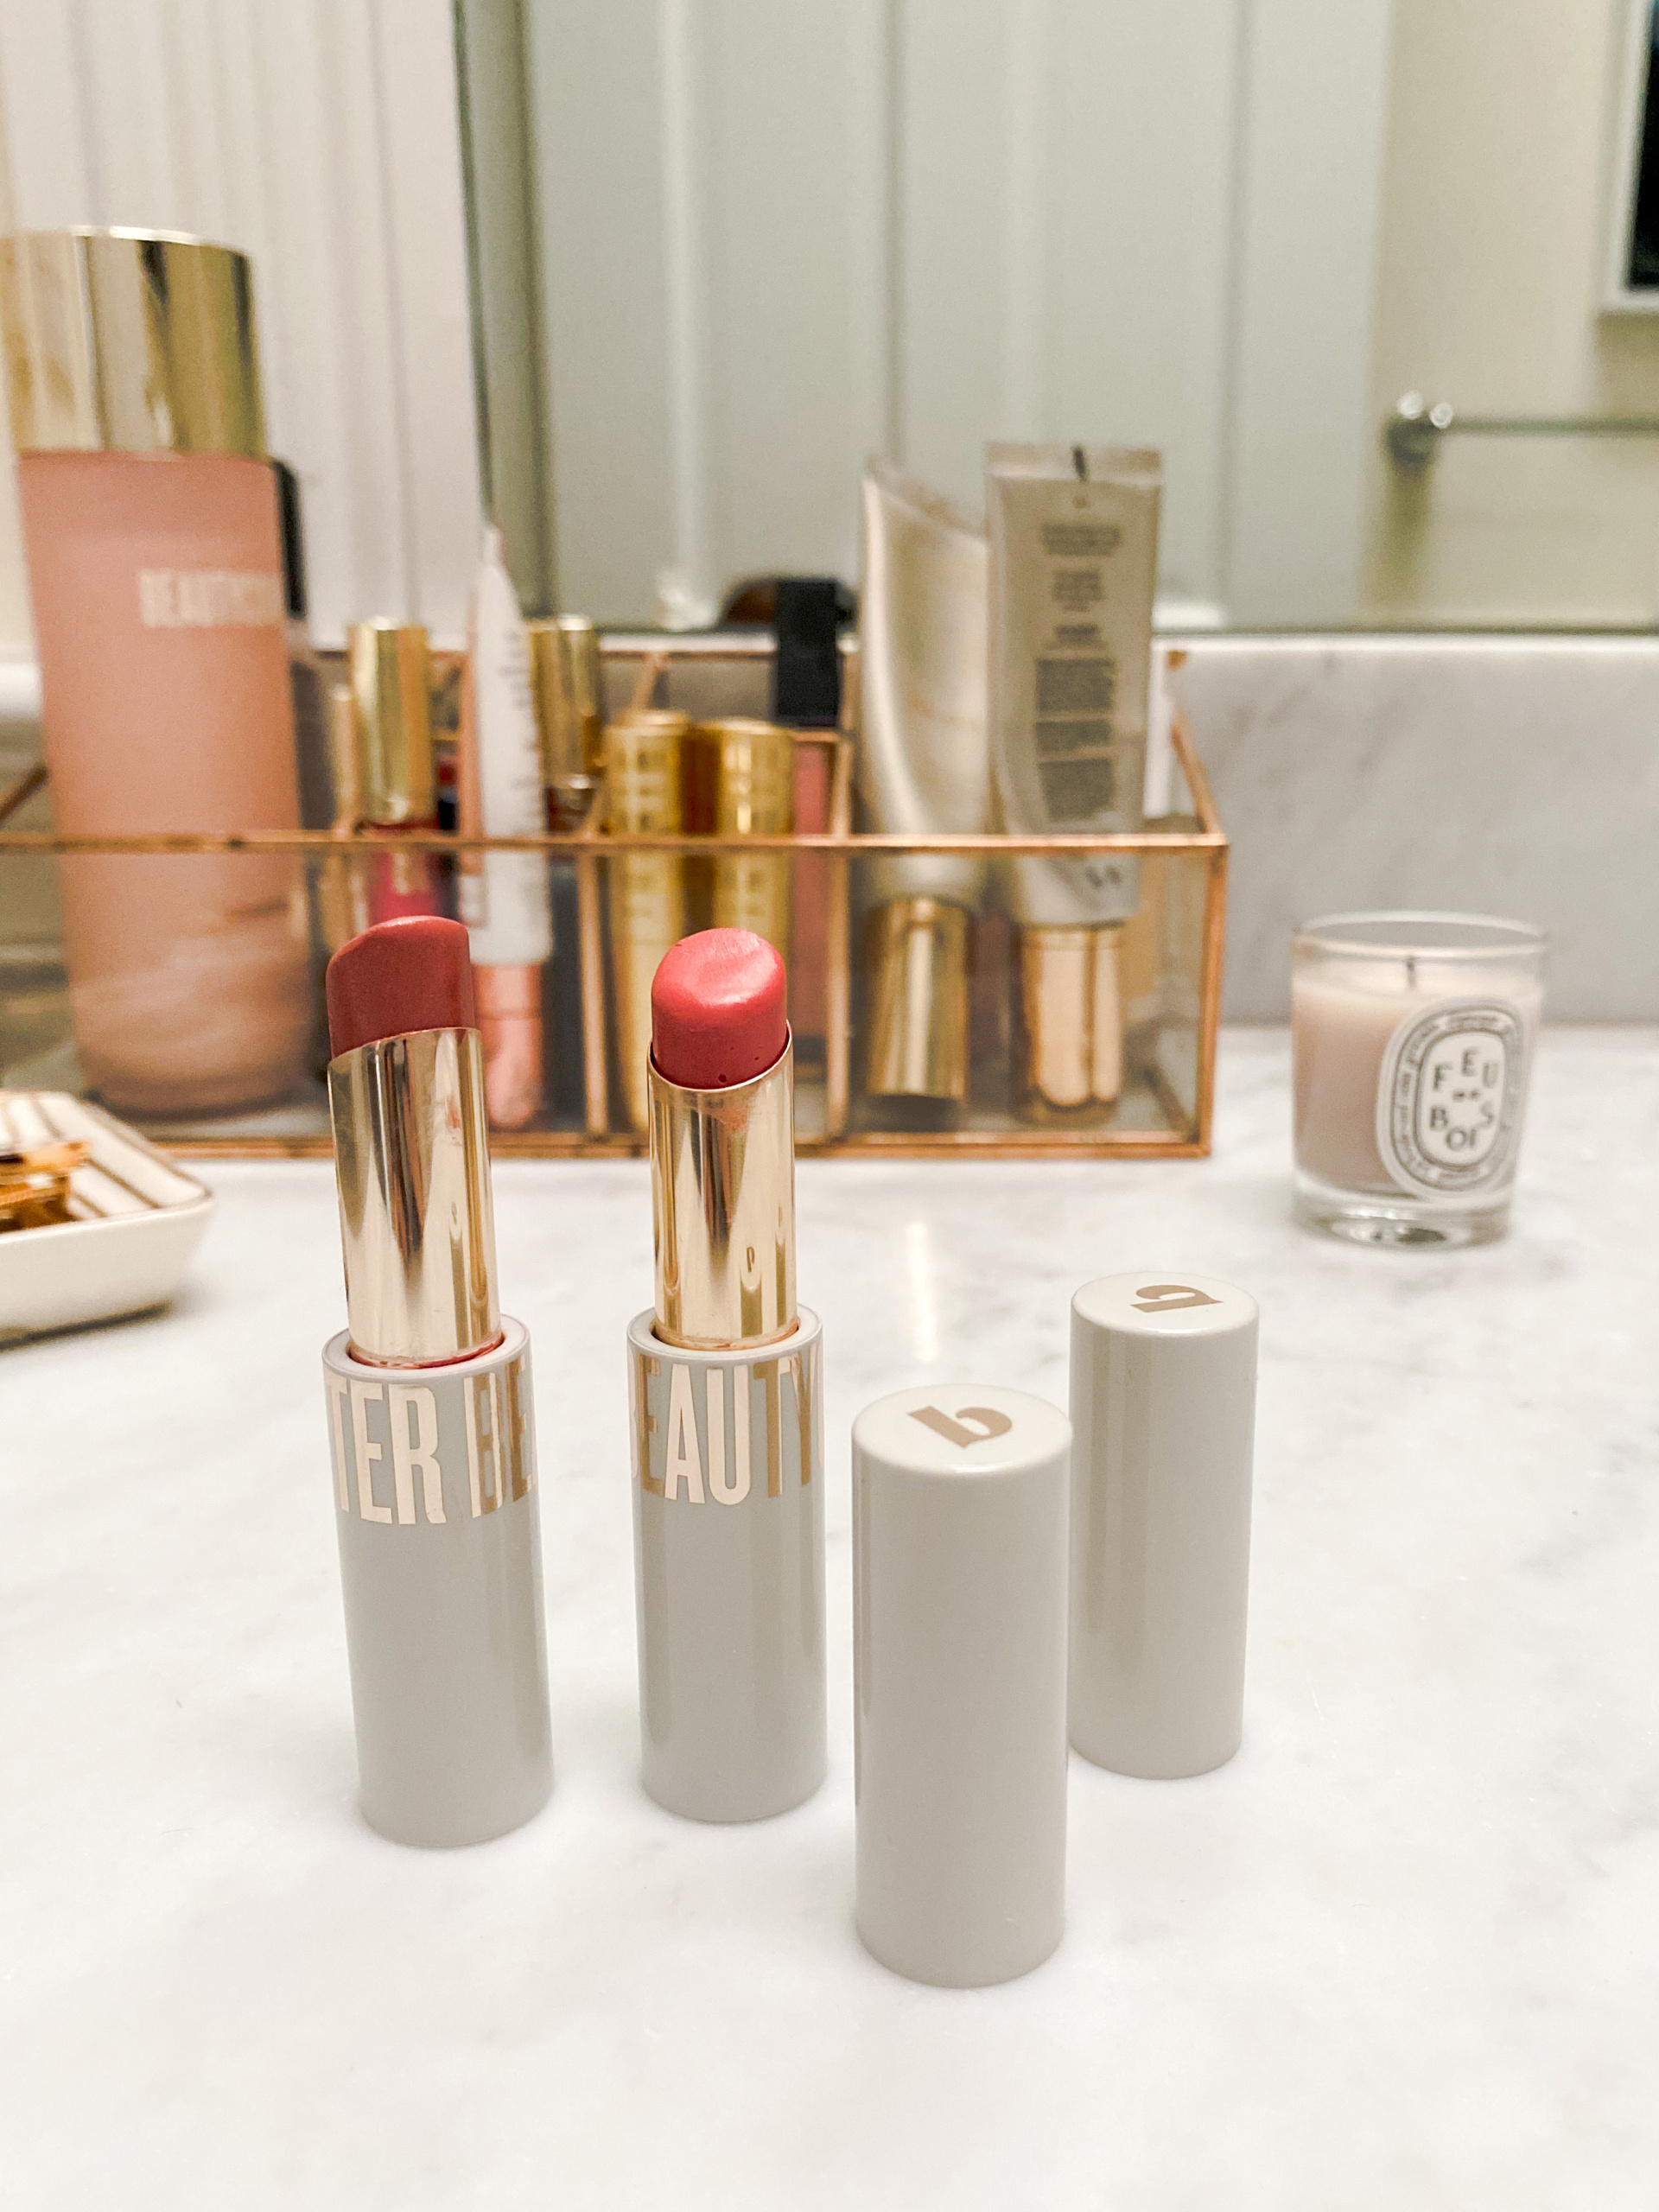 Beautycounter lipsticks, the clean beauty products you should be using, non toxic lipstick shades, finding beauty mom lipstick favorites 